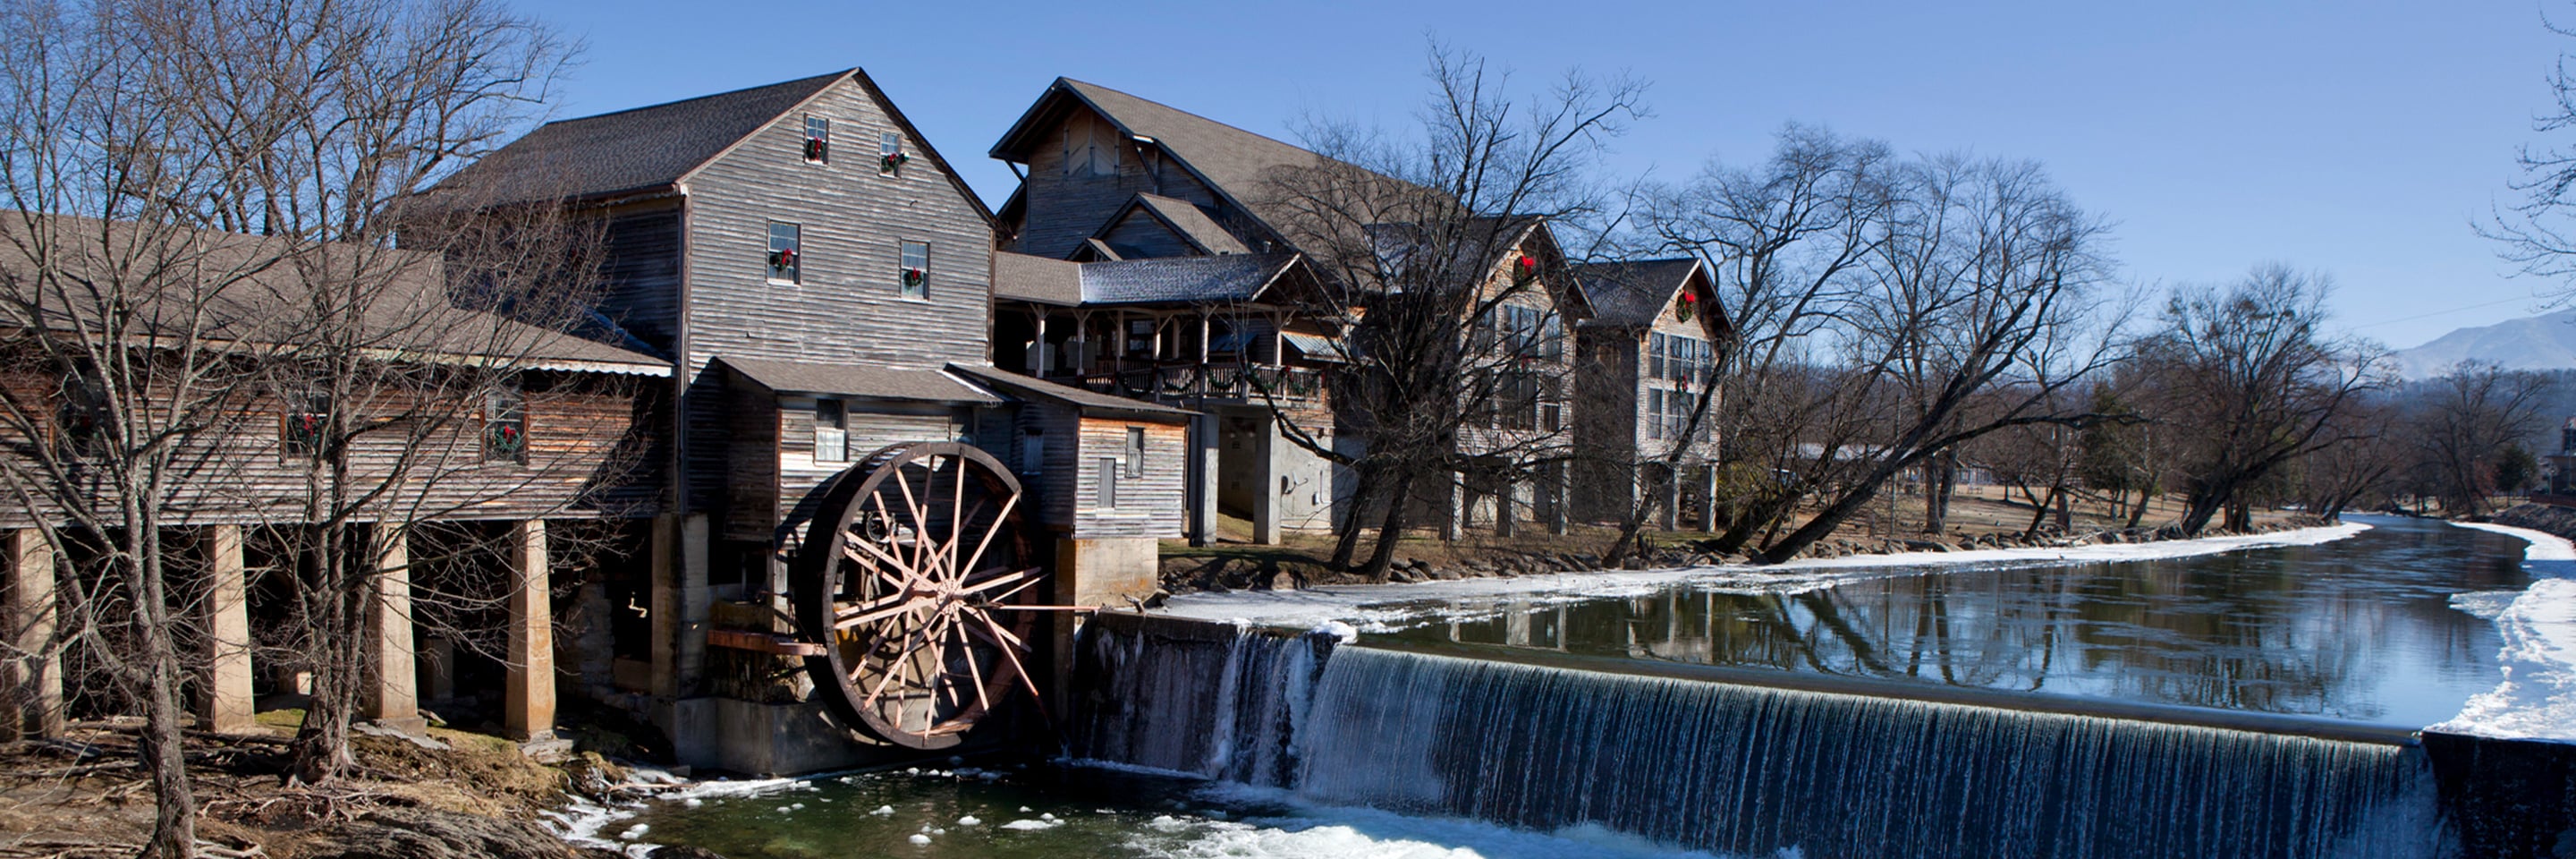 Hotels in Pigeon Forge